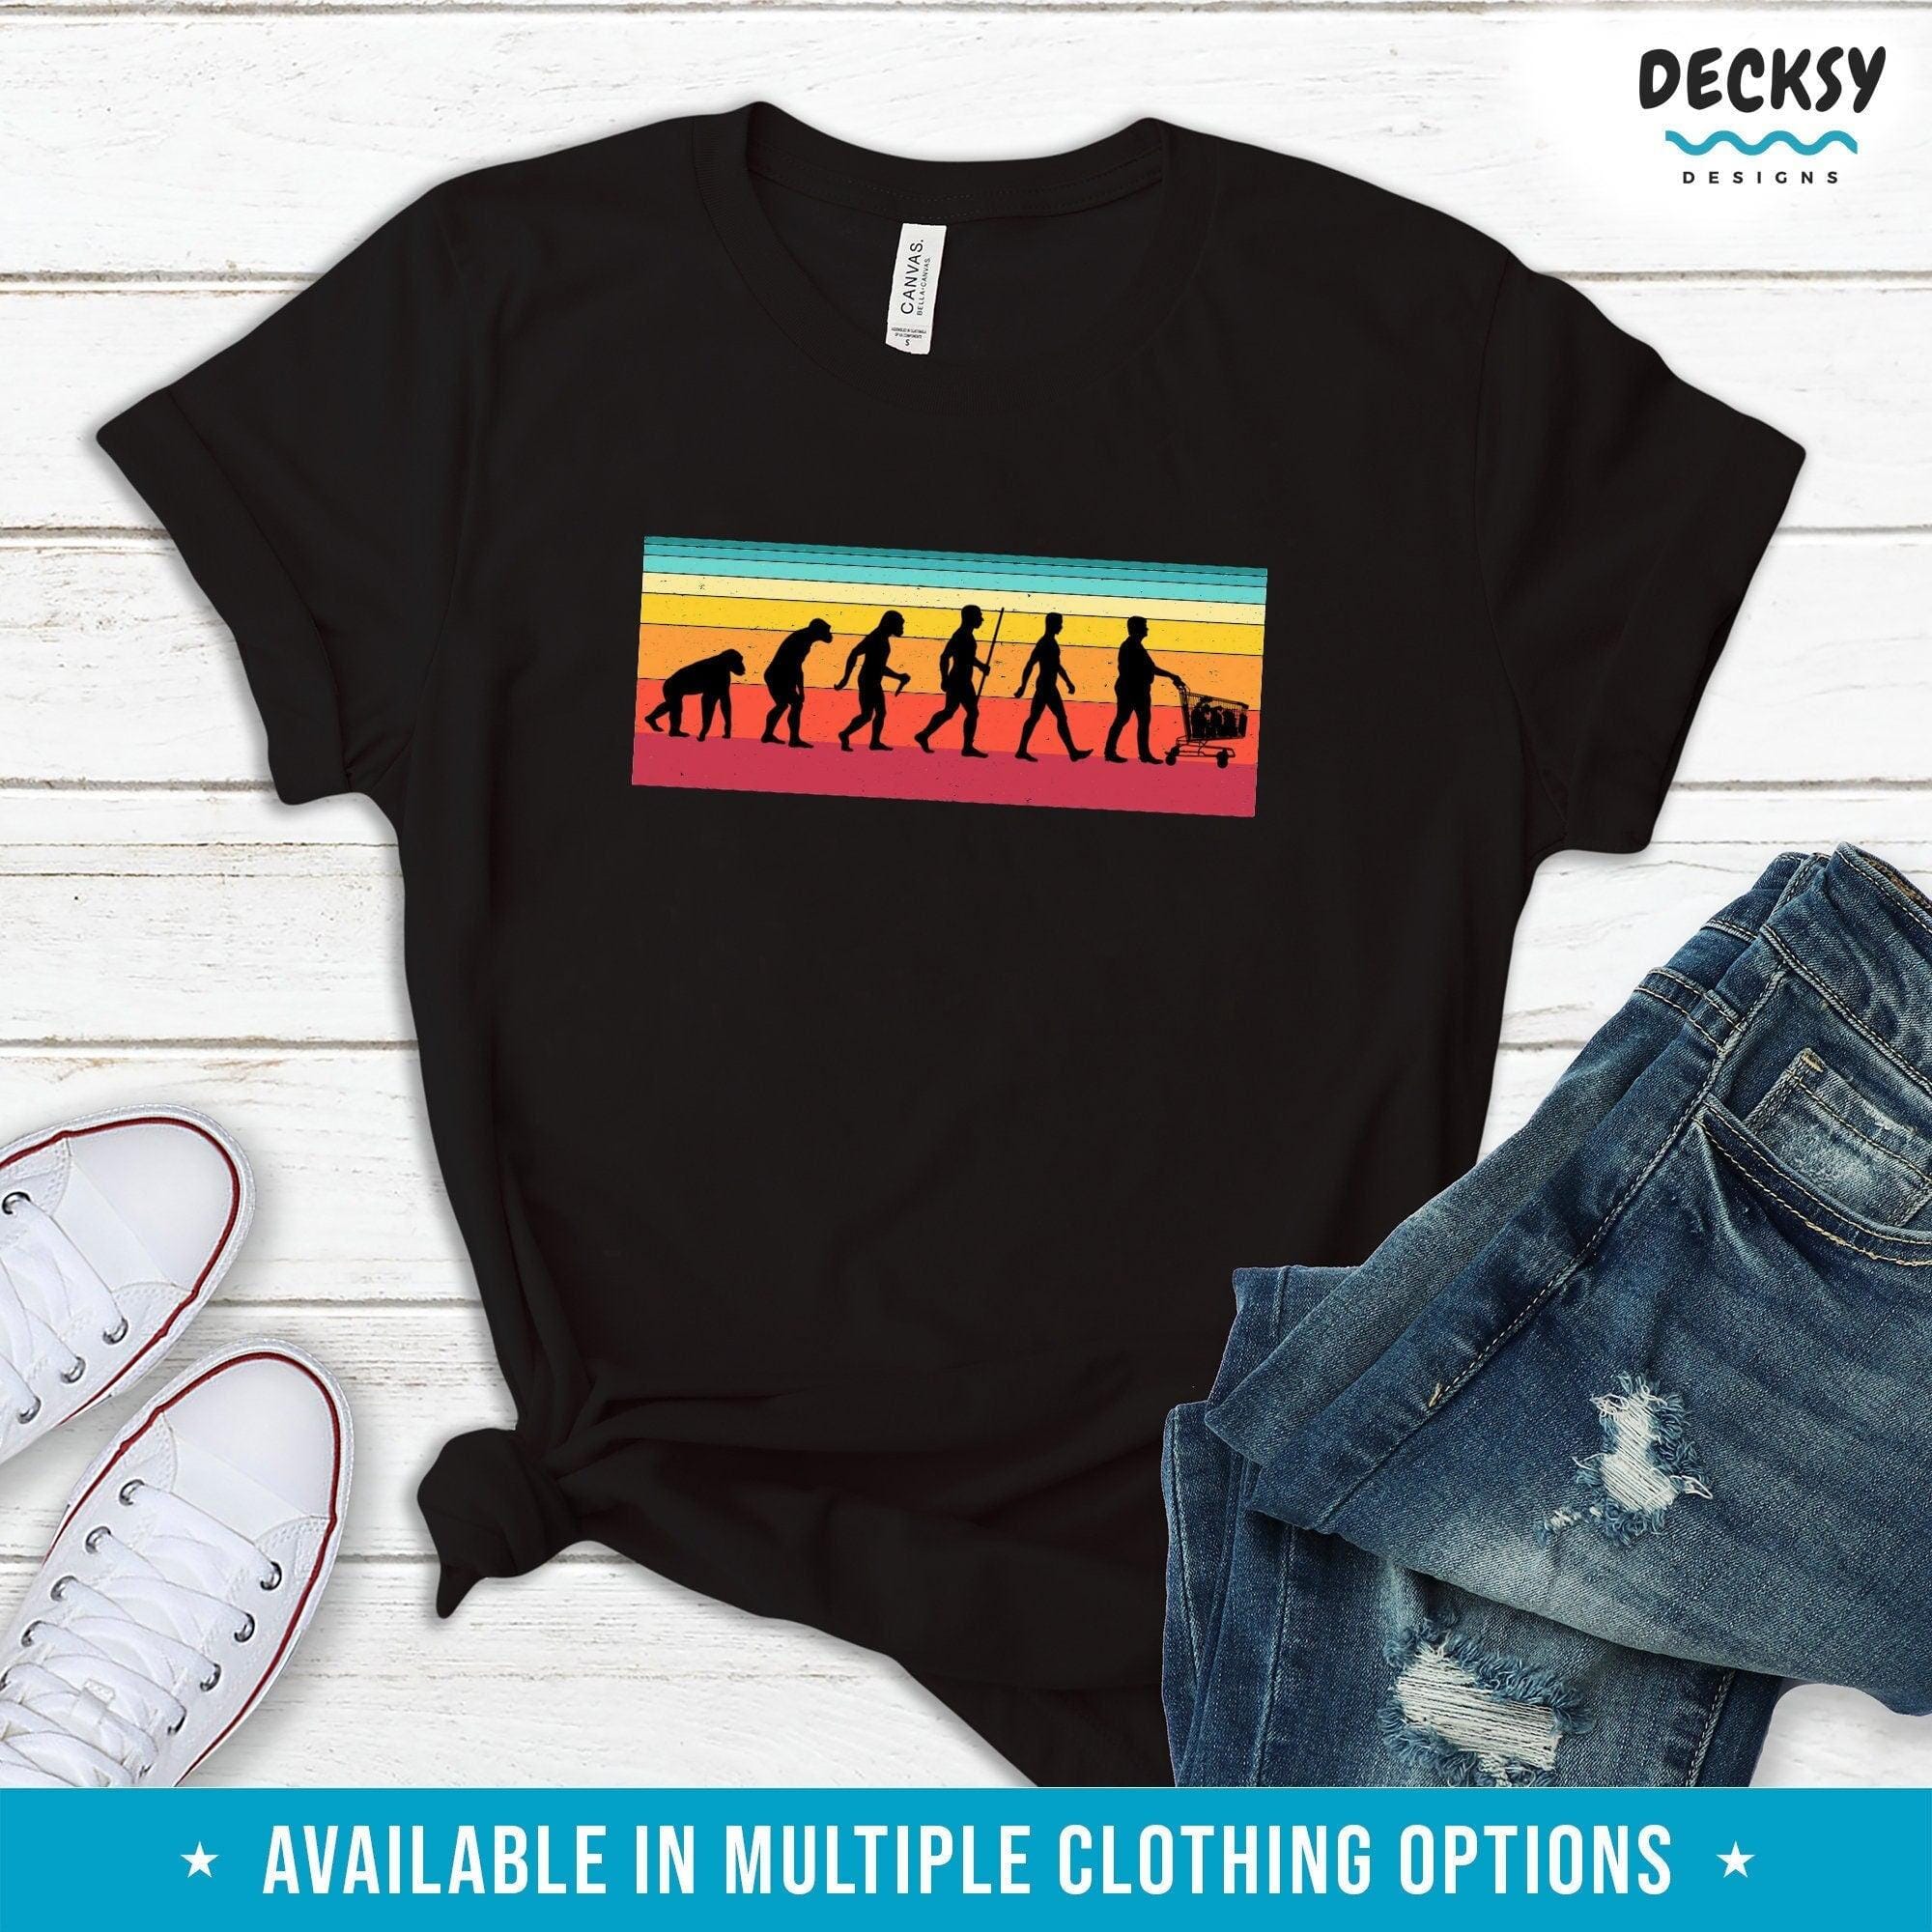 Shopper Evolution Shirt, Funny Gift For Men-Clothing:Gender-Neutral Adult Clothing:Tops & Tees:T-shirts:Graphic Tees-DecksyDesigns